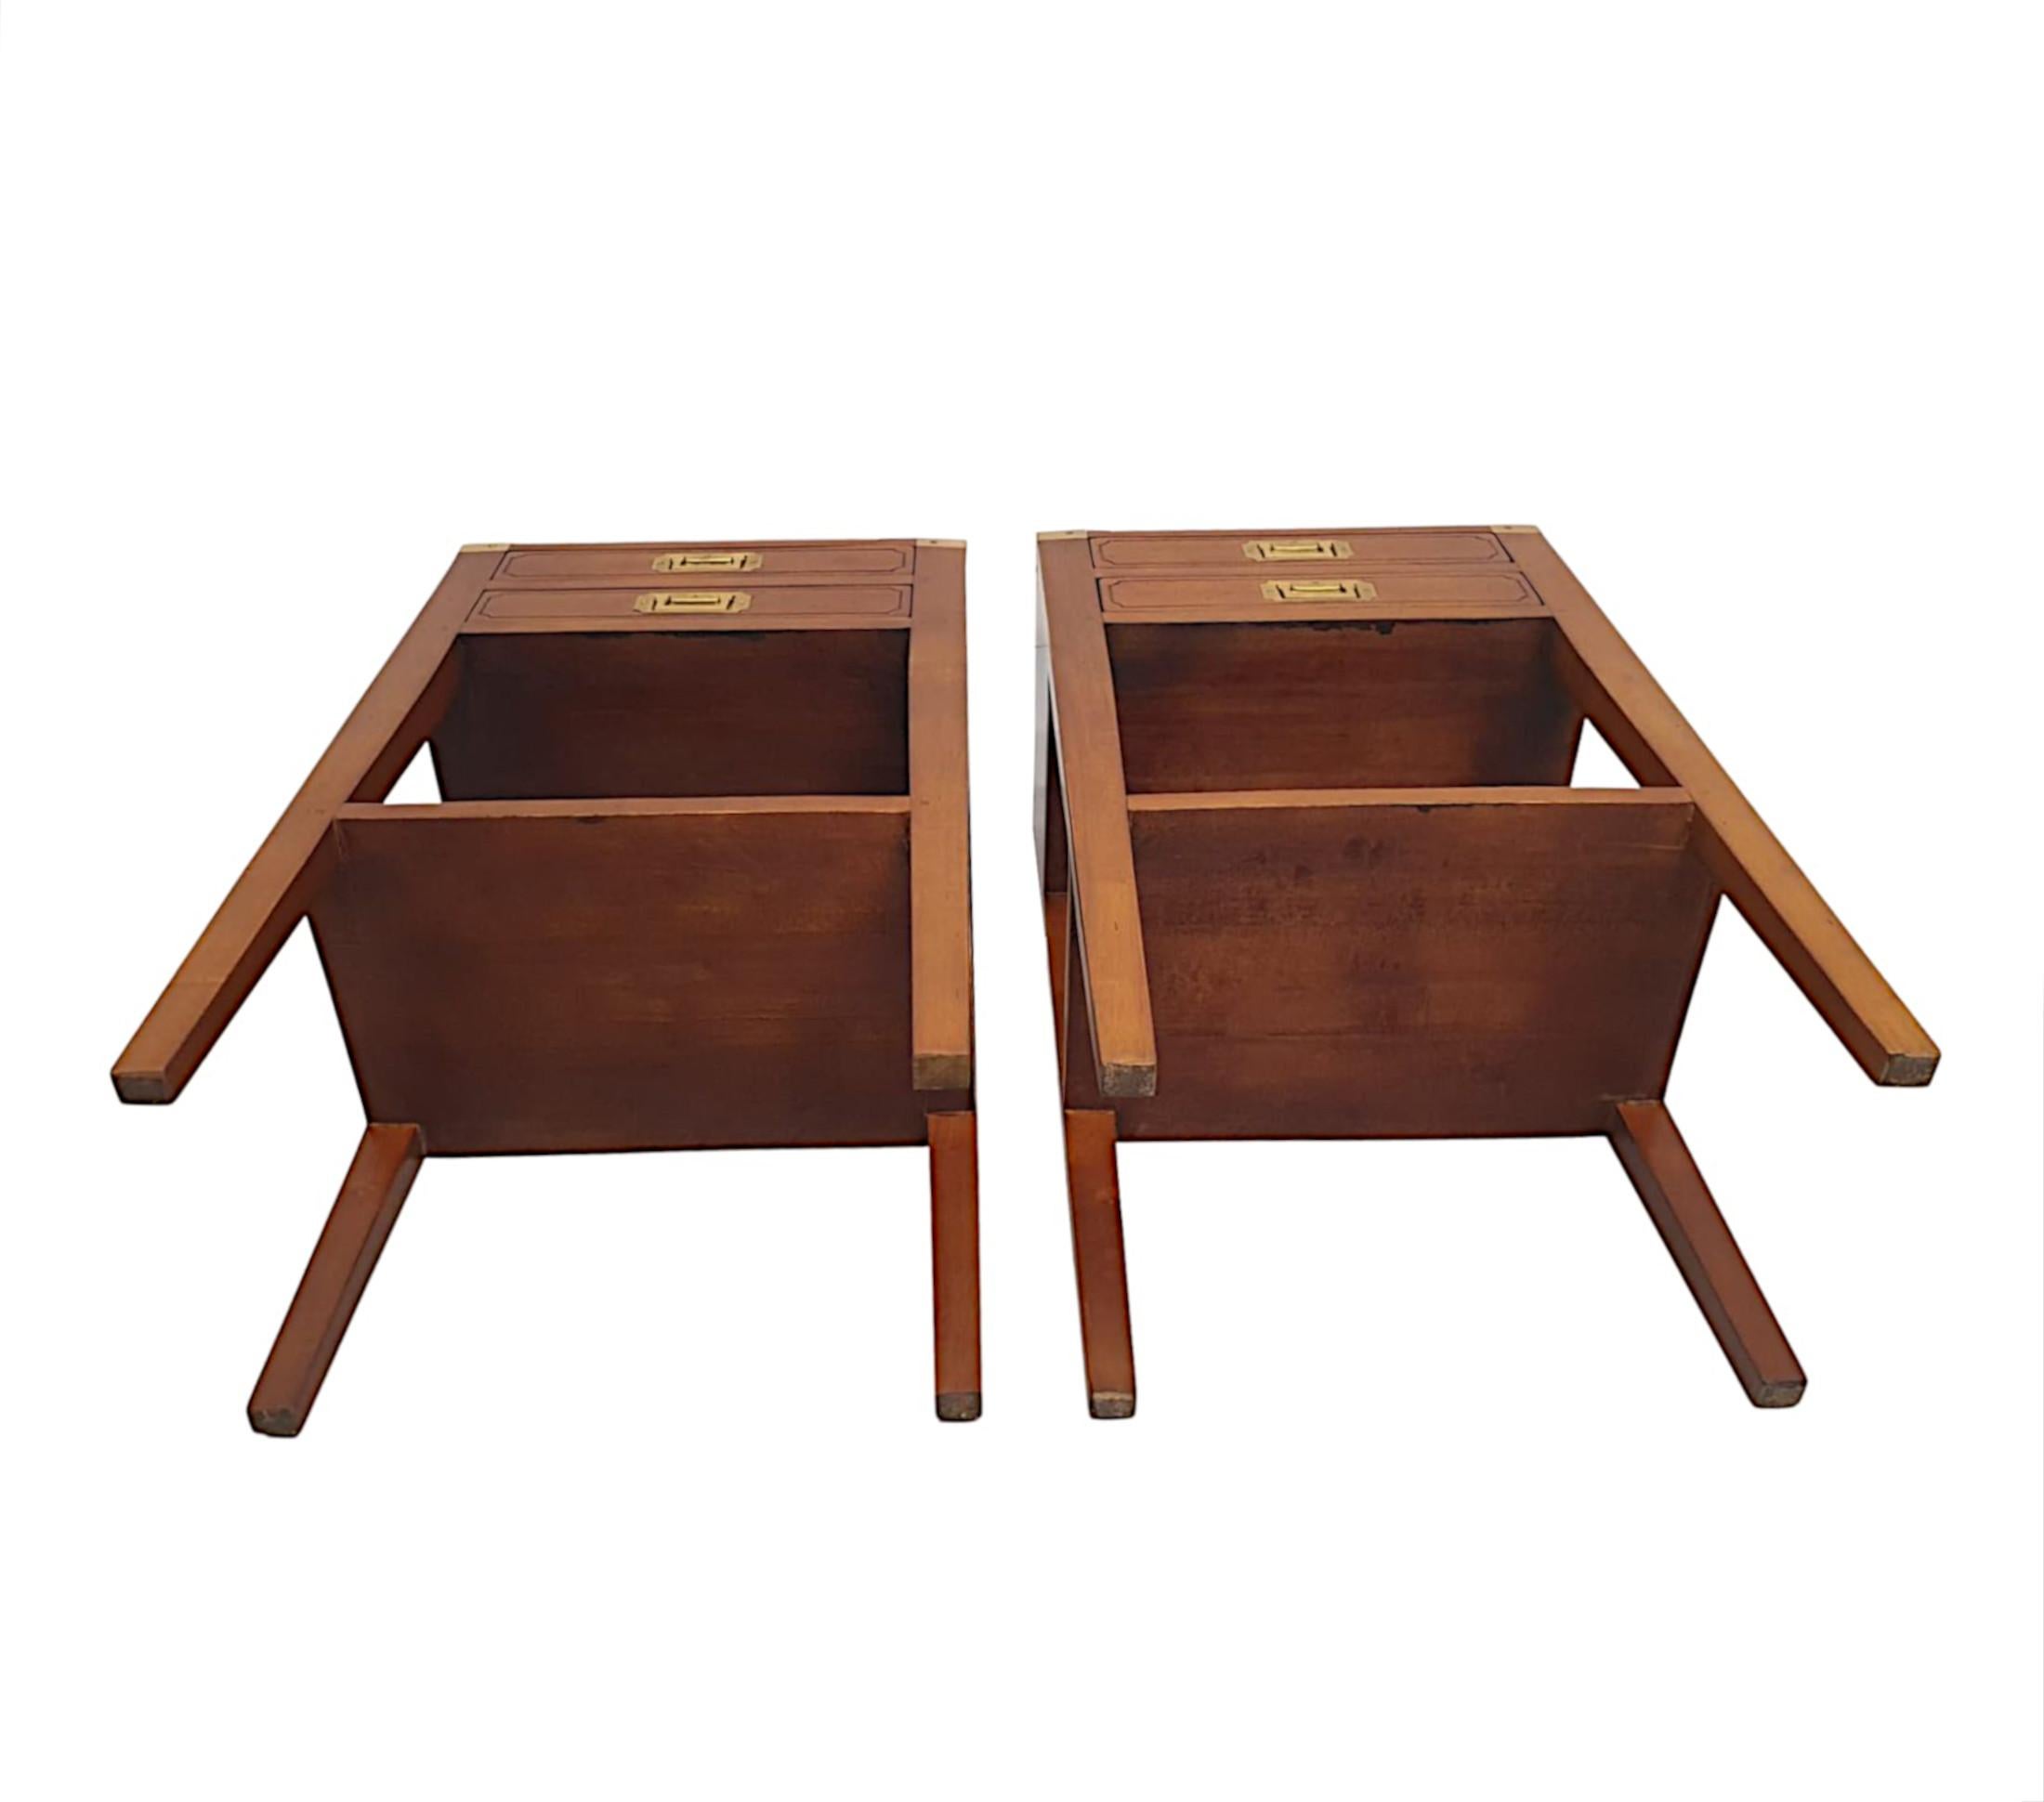 Brass  A Fabulous Pair of Campaign Style Side Tables